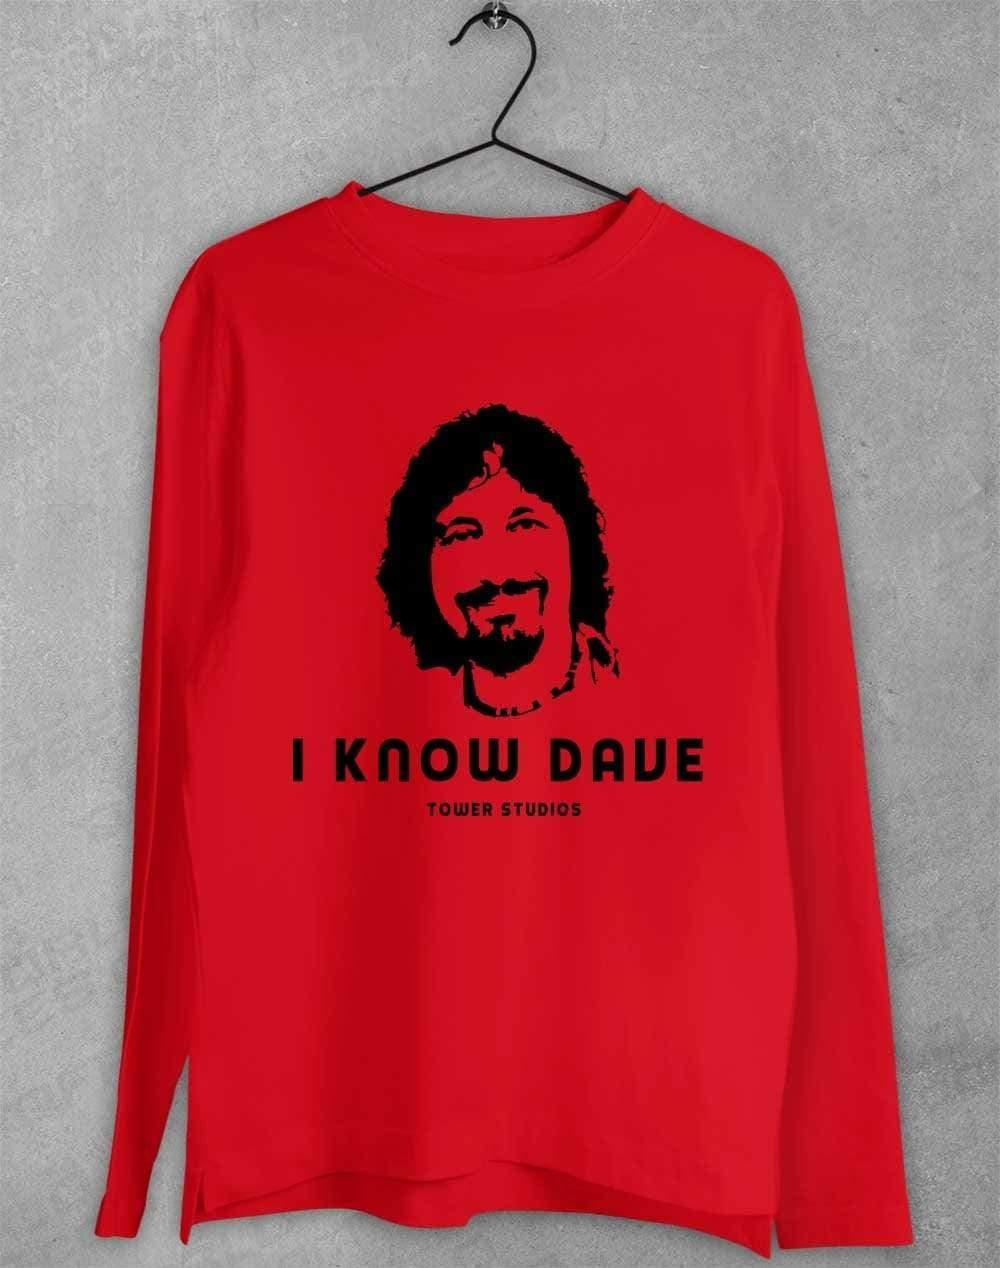 Tower Studios I Know Dave Long Sleeve T-Shirt S / Red  - Off World Tees